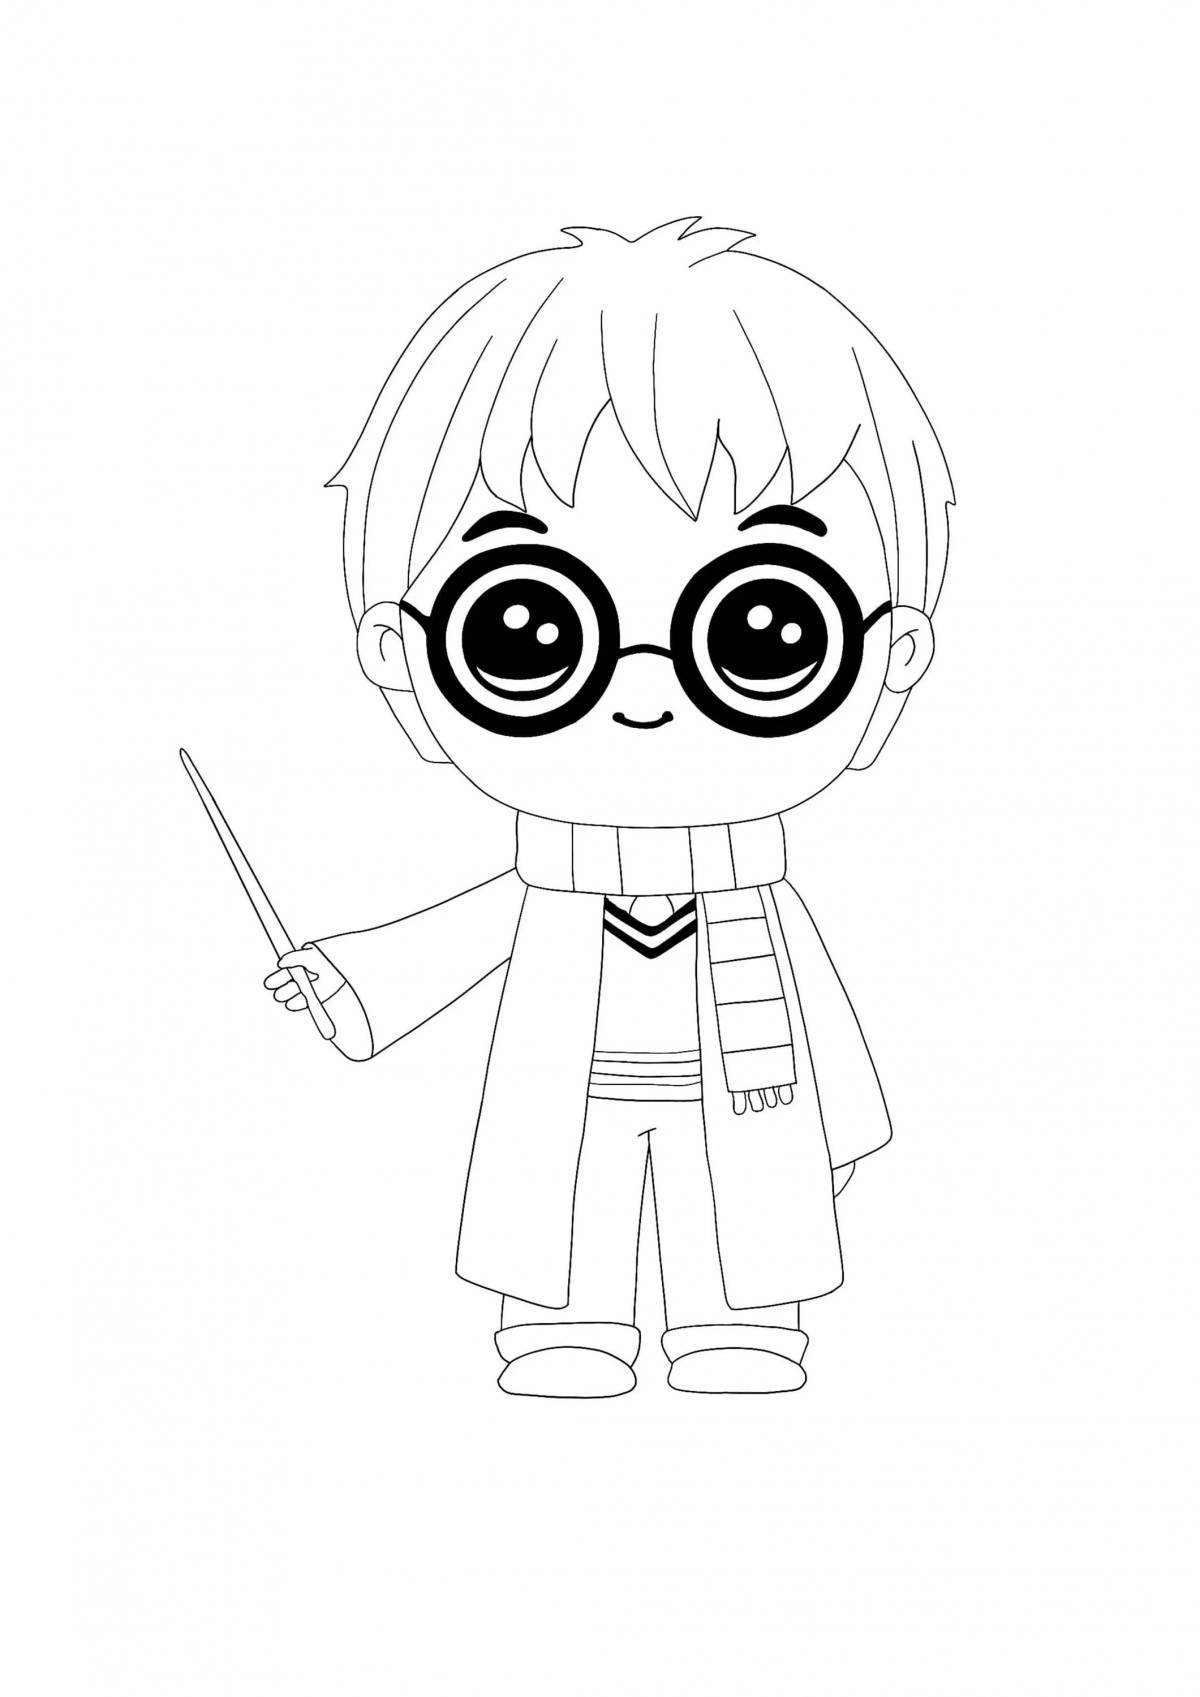 Harry potter fun coloring easy